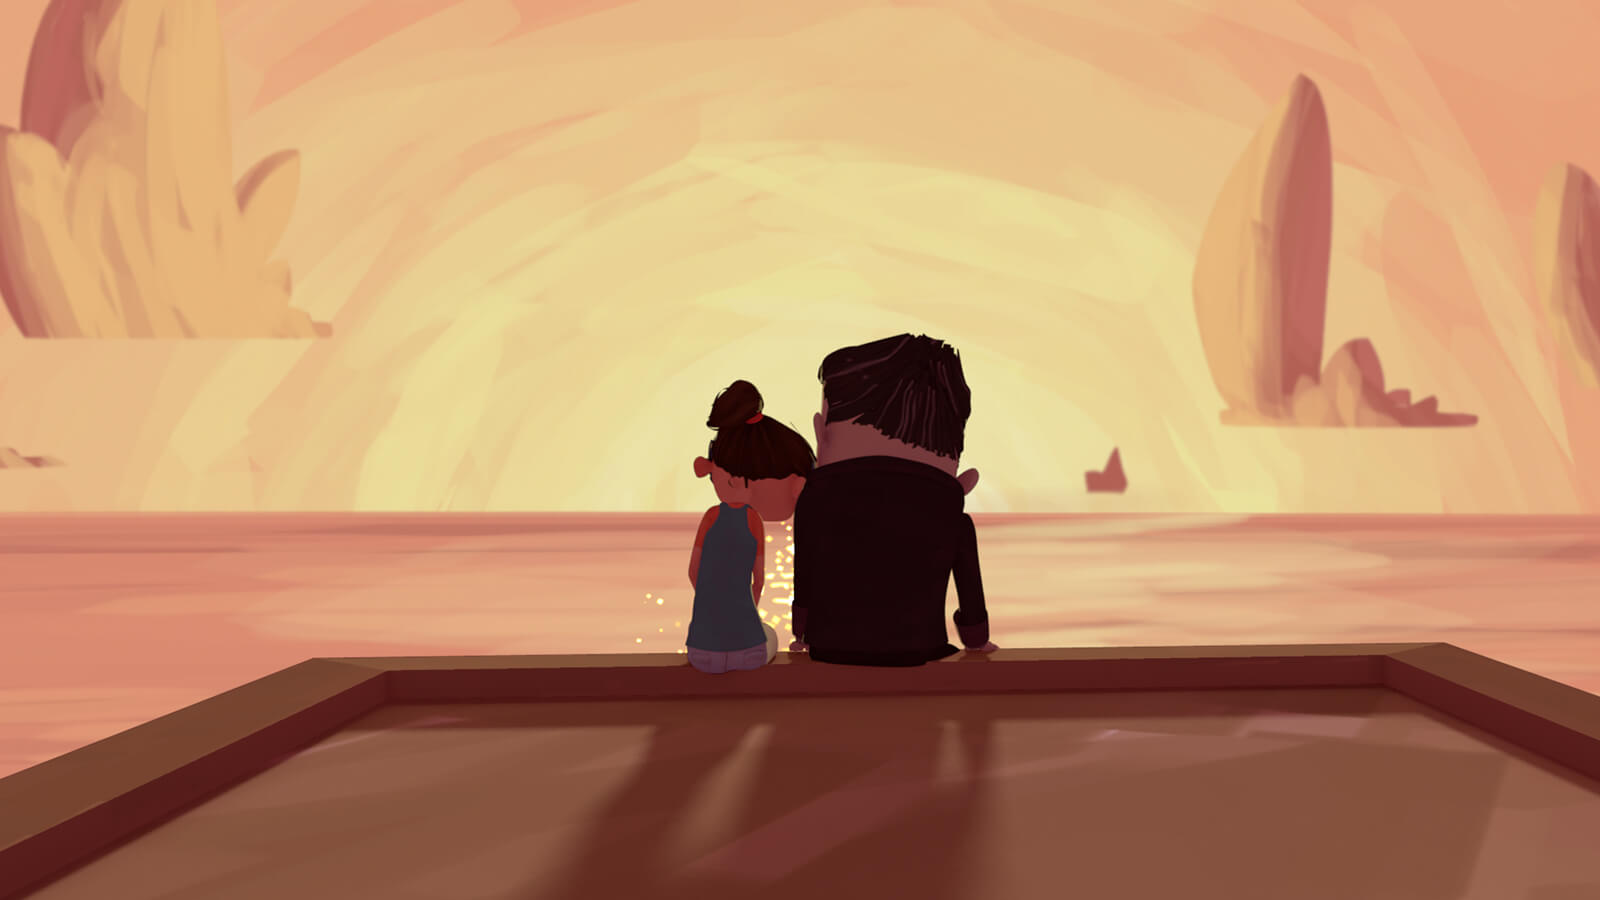 From behind, a girl rests her head on the shoulder of a man as they sit on an edge looking out at an orange sea and sky